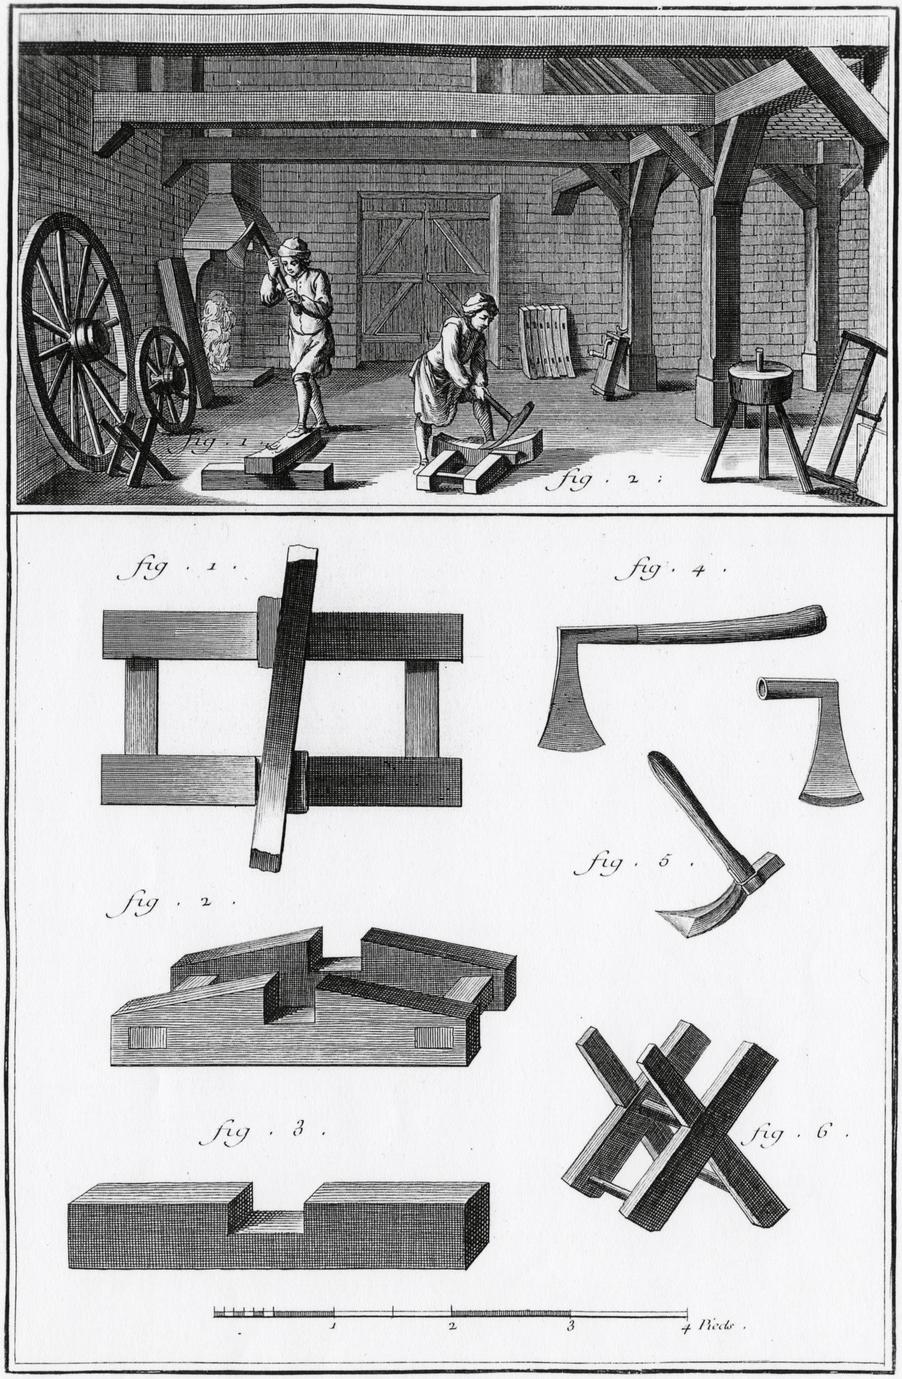 Print detailing carpenters working in a shop in the top portion, and the bottom portion showing more detailed drawings of the individual tools.